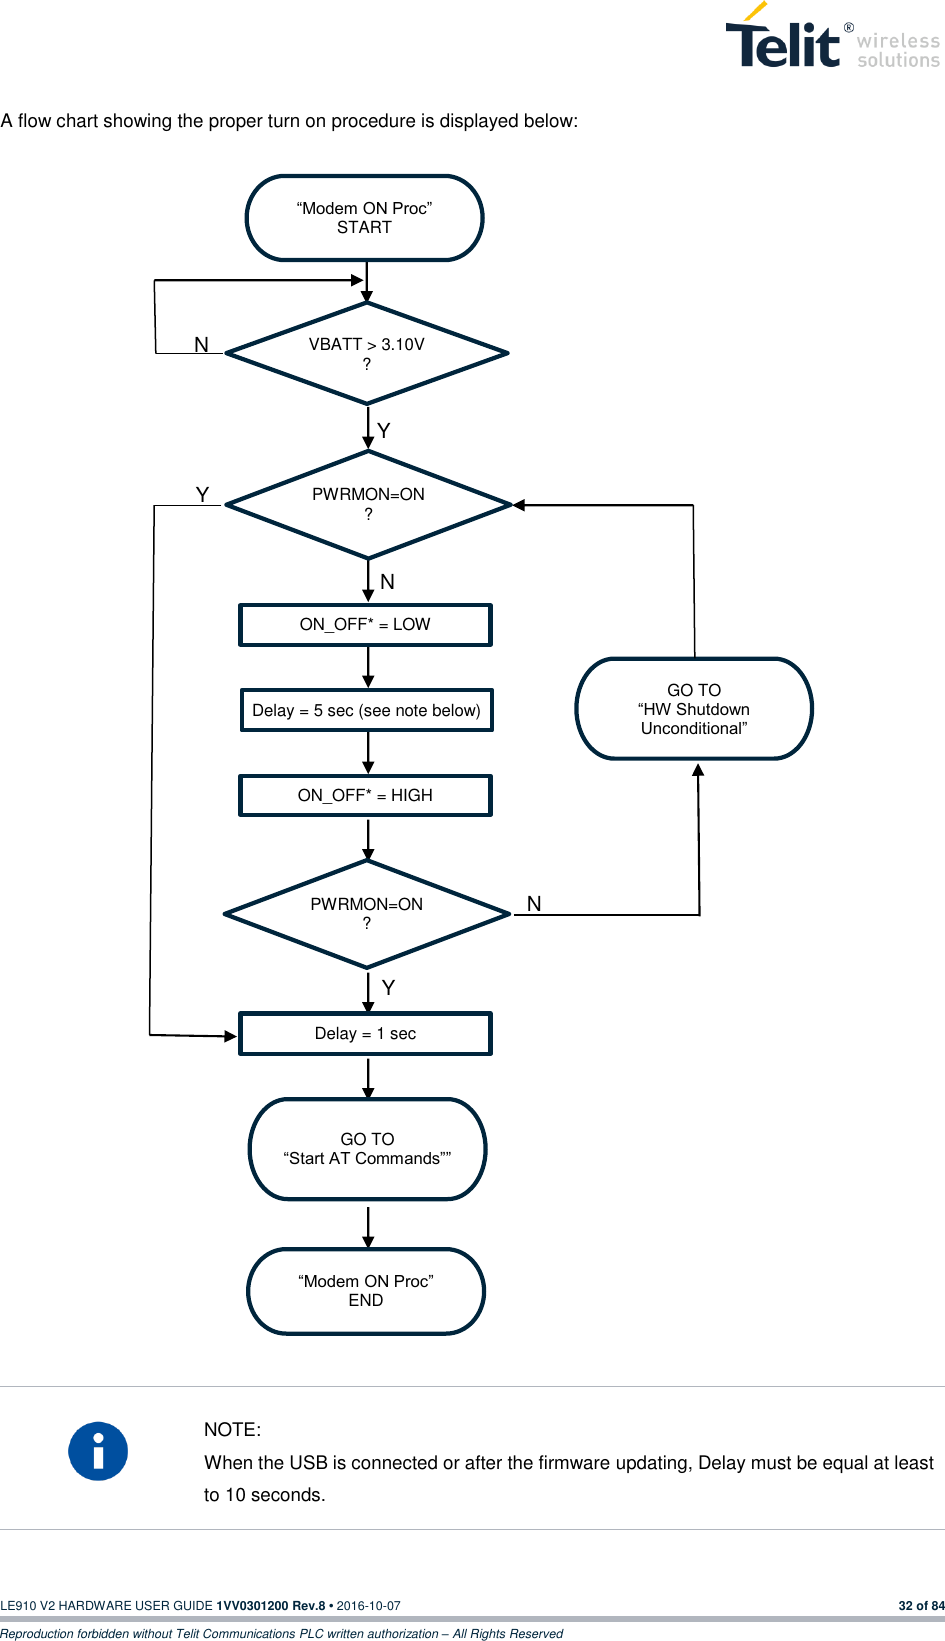   LE910 V2 HARDWARE USER GUIDE 1VV0301200 Rev.8 • 2016-10-07 32 of 84 Reproduction forbidden without Telit Communications PLC written authorization – All Rights Reserved A flow chart showing the proper turn on procedure is displayed below:                                            NOTE: When the USB is connected or after the firmware updating, Delay must be equal at least to 10 seconds. “Modem ON Proc” START VBATT &gt; 3.10V ? ON_OFF* = LOW PWRMON=ON ? Delay = 5 sec (see note below) ON_OFF* = HIGH GO TO “HW Shutdown Unconditional” PWRMON=ON ? Delay = 1 sec GO TO “Start AT Commands”” “Modem ON Proc” END N N Y Y Y N 